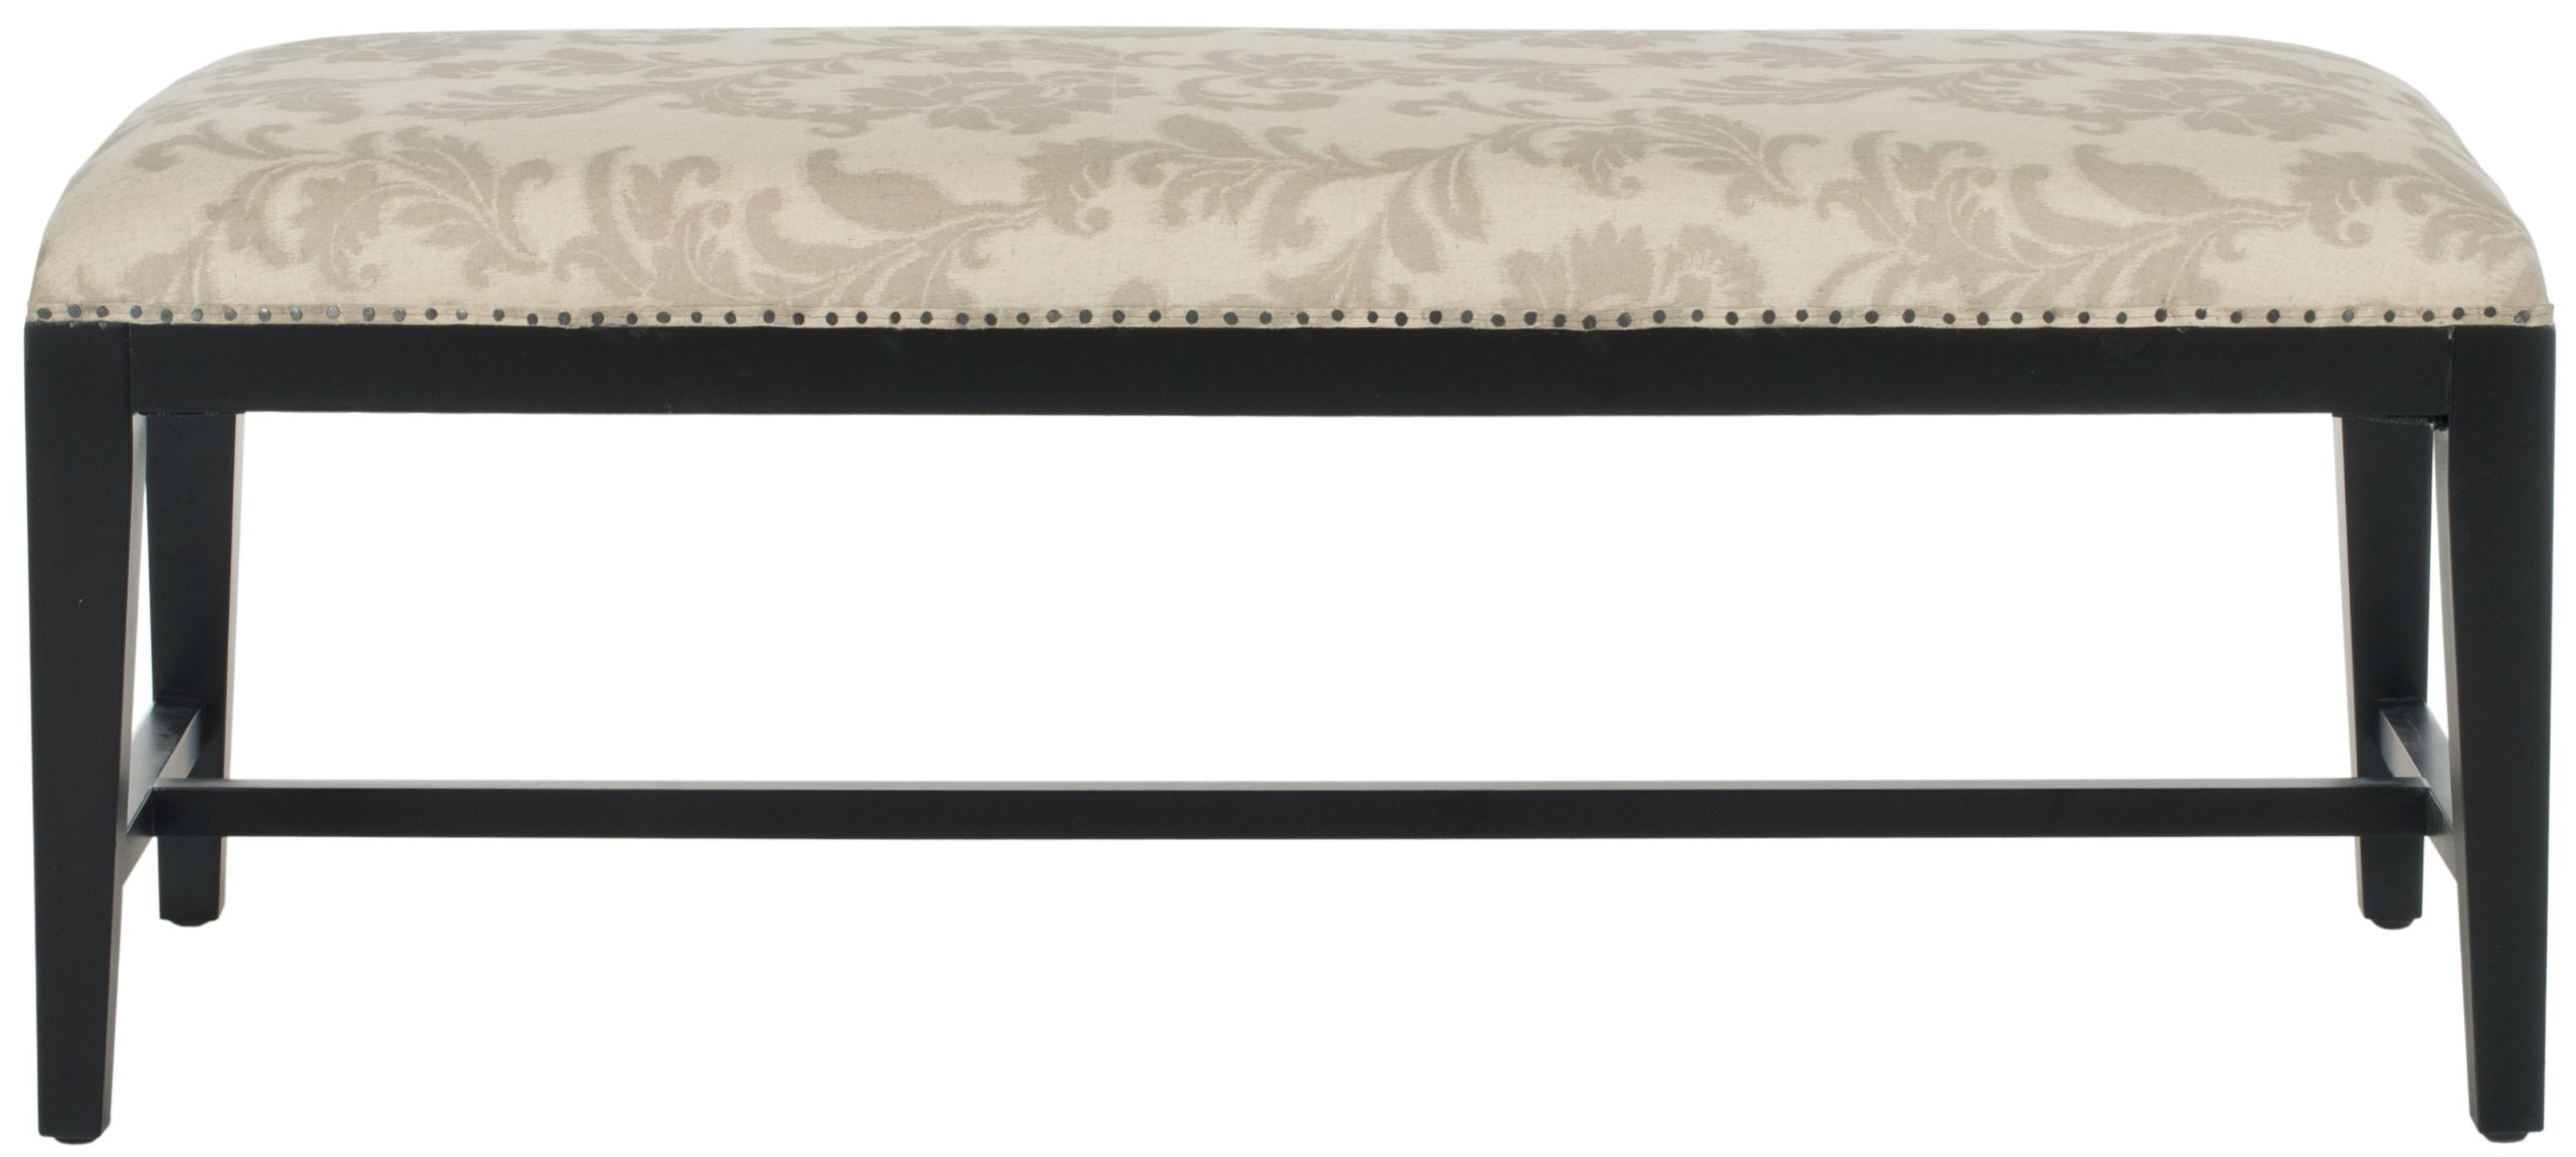 Zambia Bench - Taupe And Beige Print - DISCONTINUED - Image 0